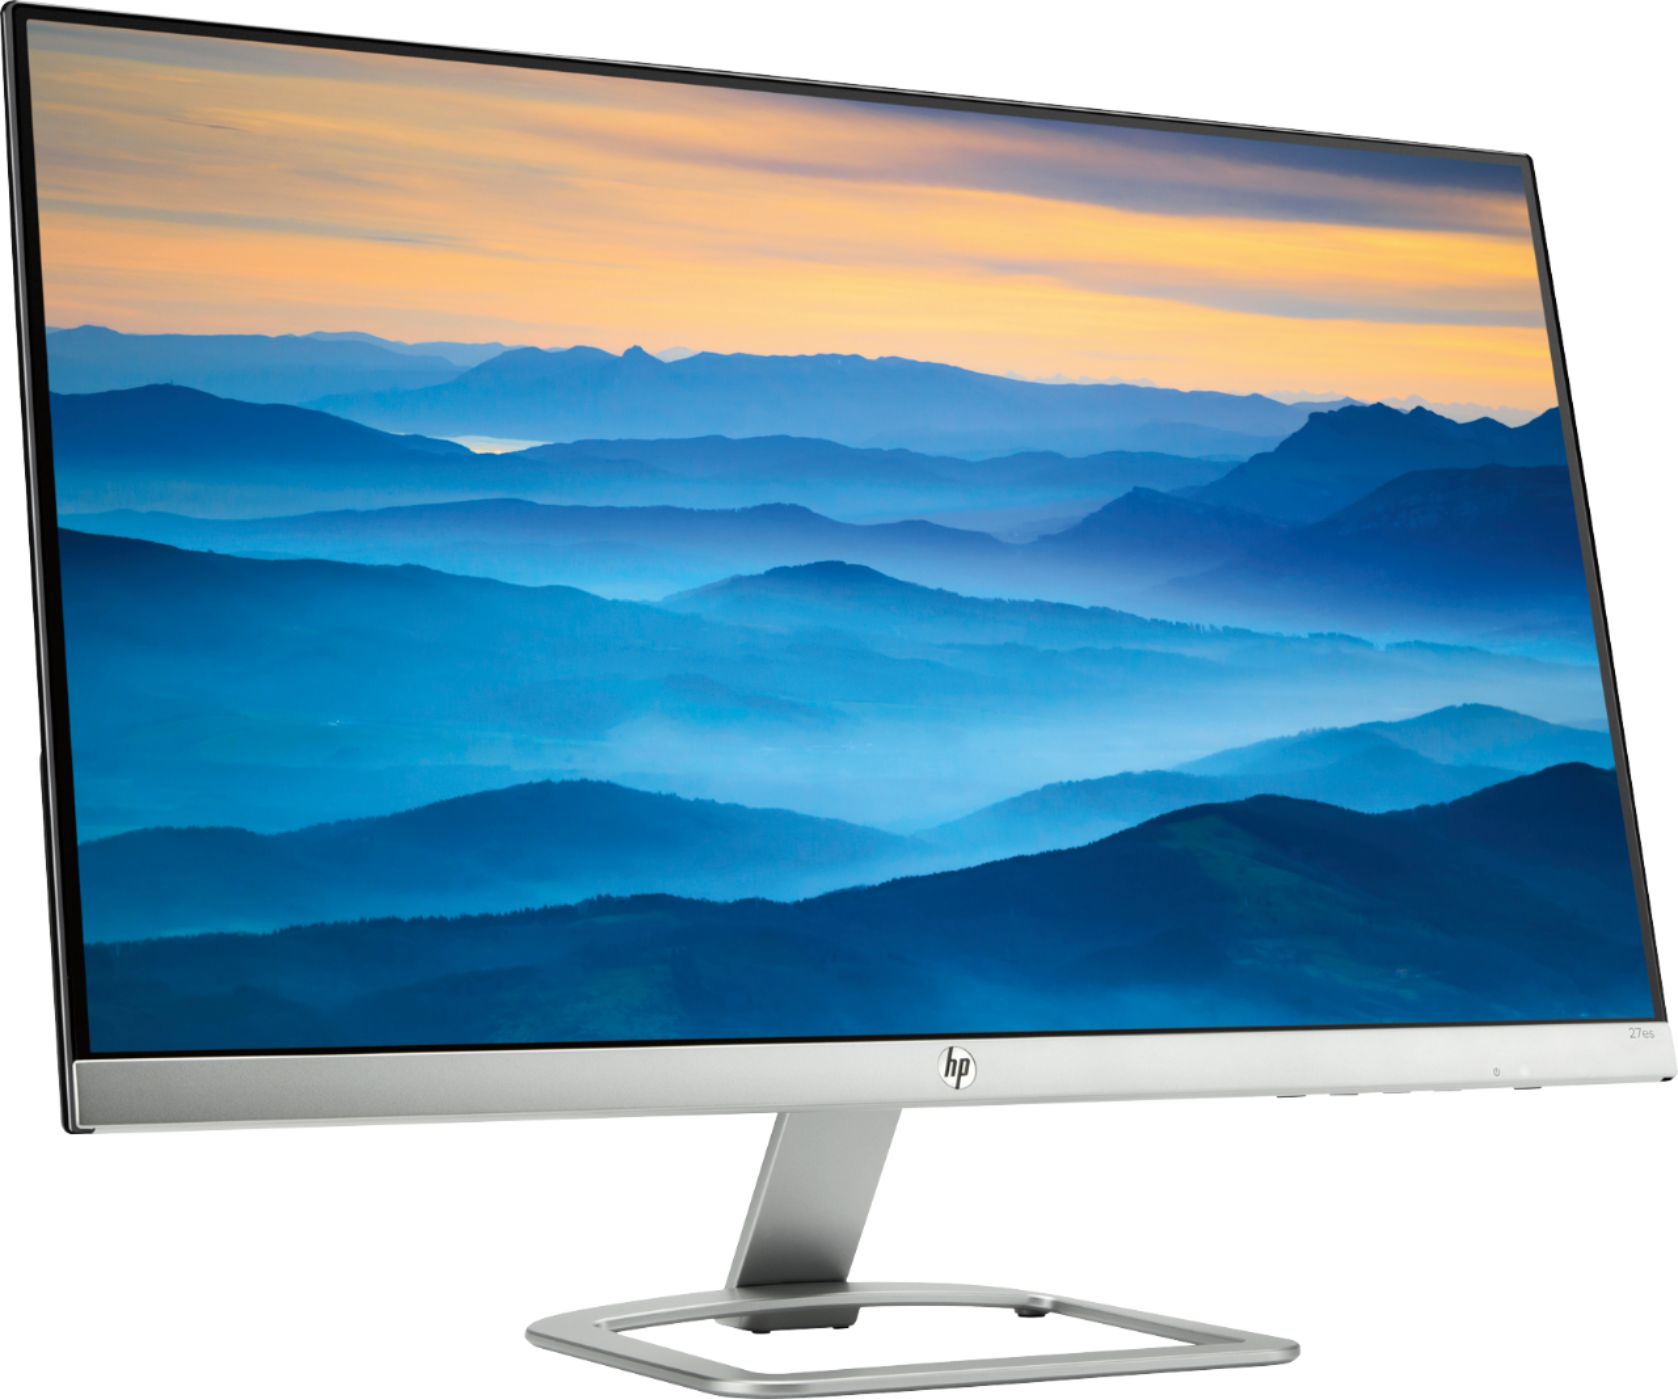 Angle View: HP - Geek Squad Certified Refurbished 27" IPS LED FHD Monitor - Natural Silver